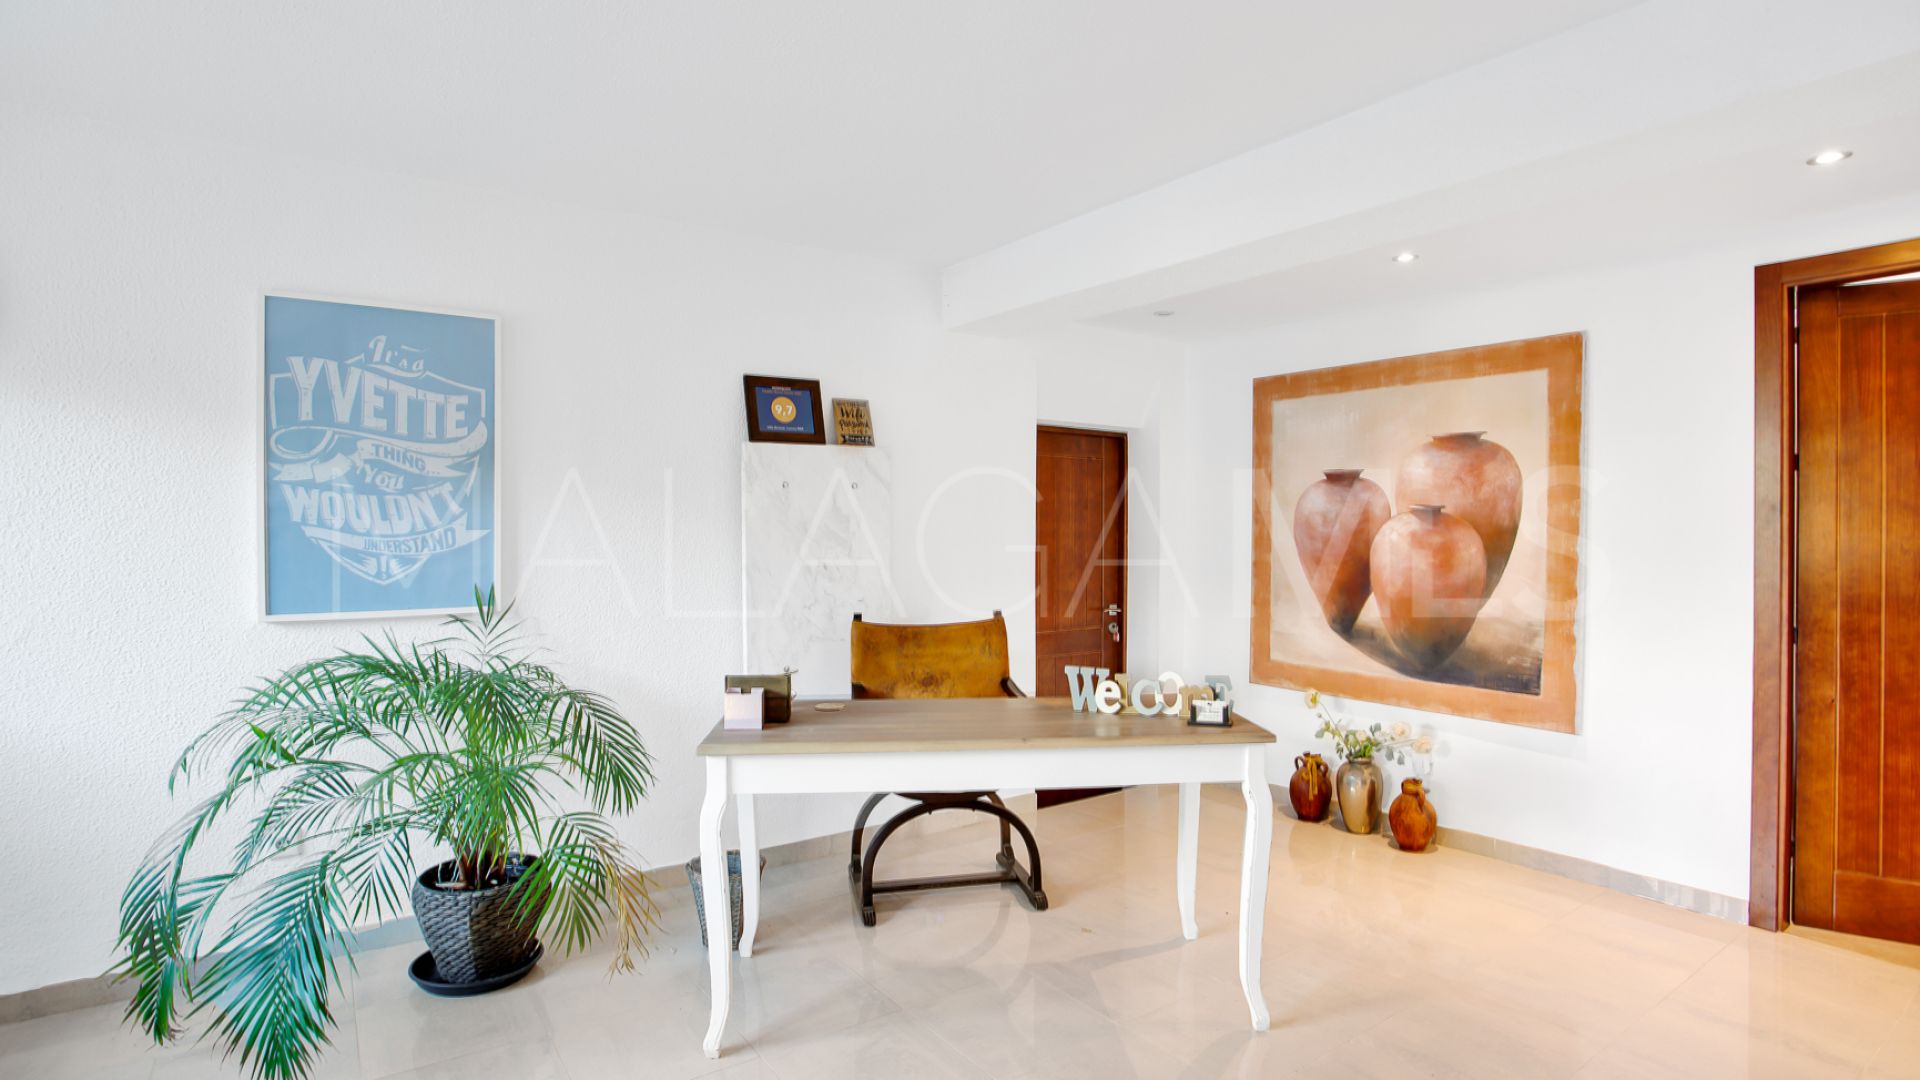 For sale villa with 6 bedrooms in Marbesa